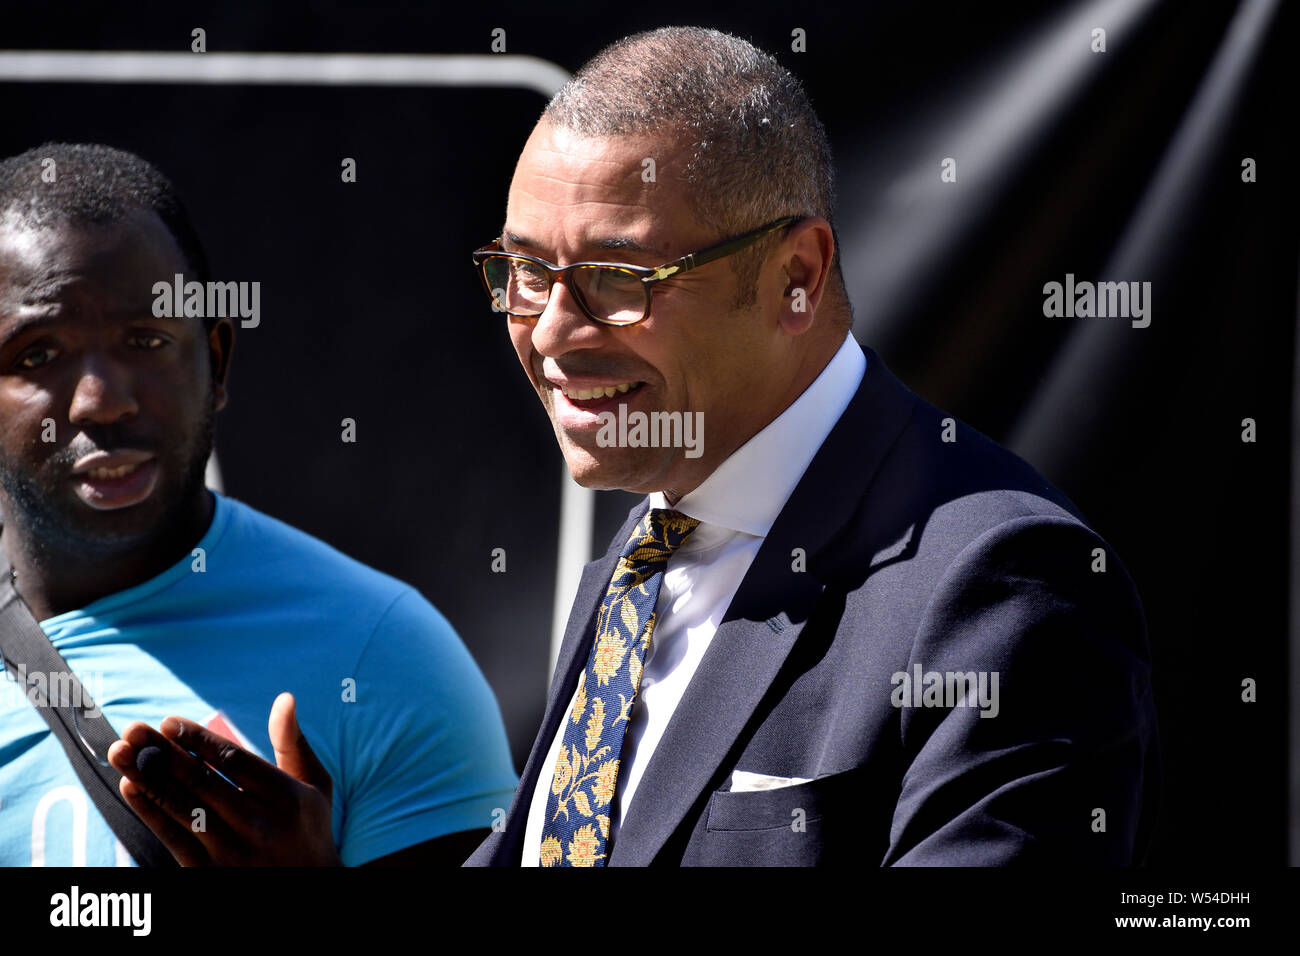 James Cleverly MP (Con: Braintree) Minister without Portfolio - Conservative Party chair - talking to Femi Oluwole - pro-European poilitical activist Stock Photo